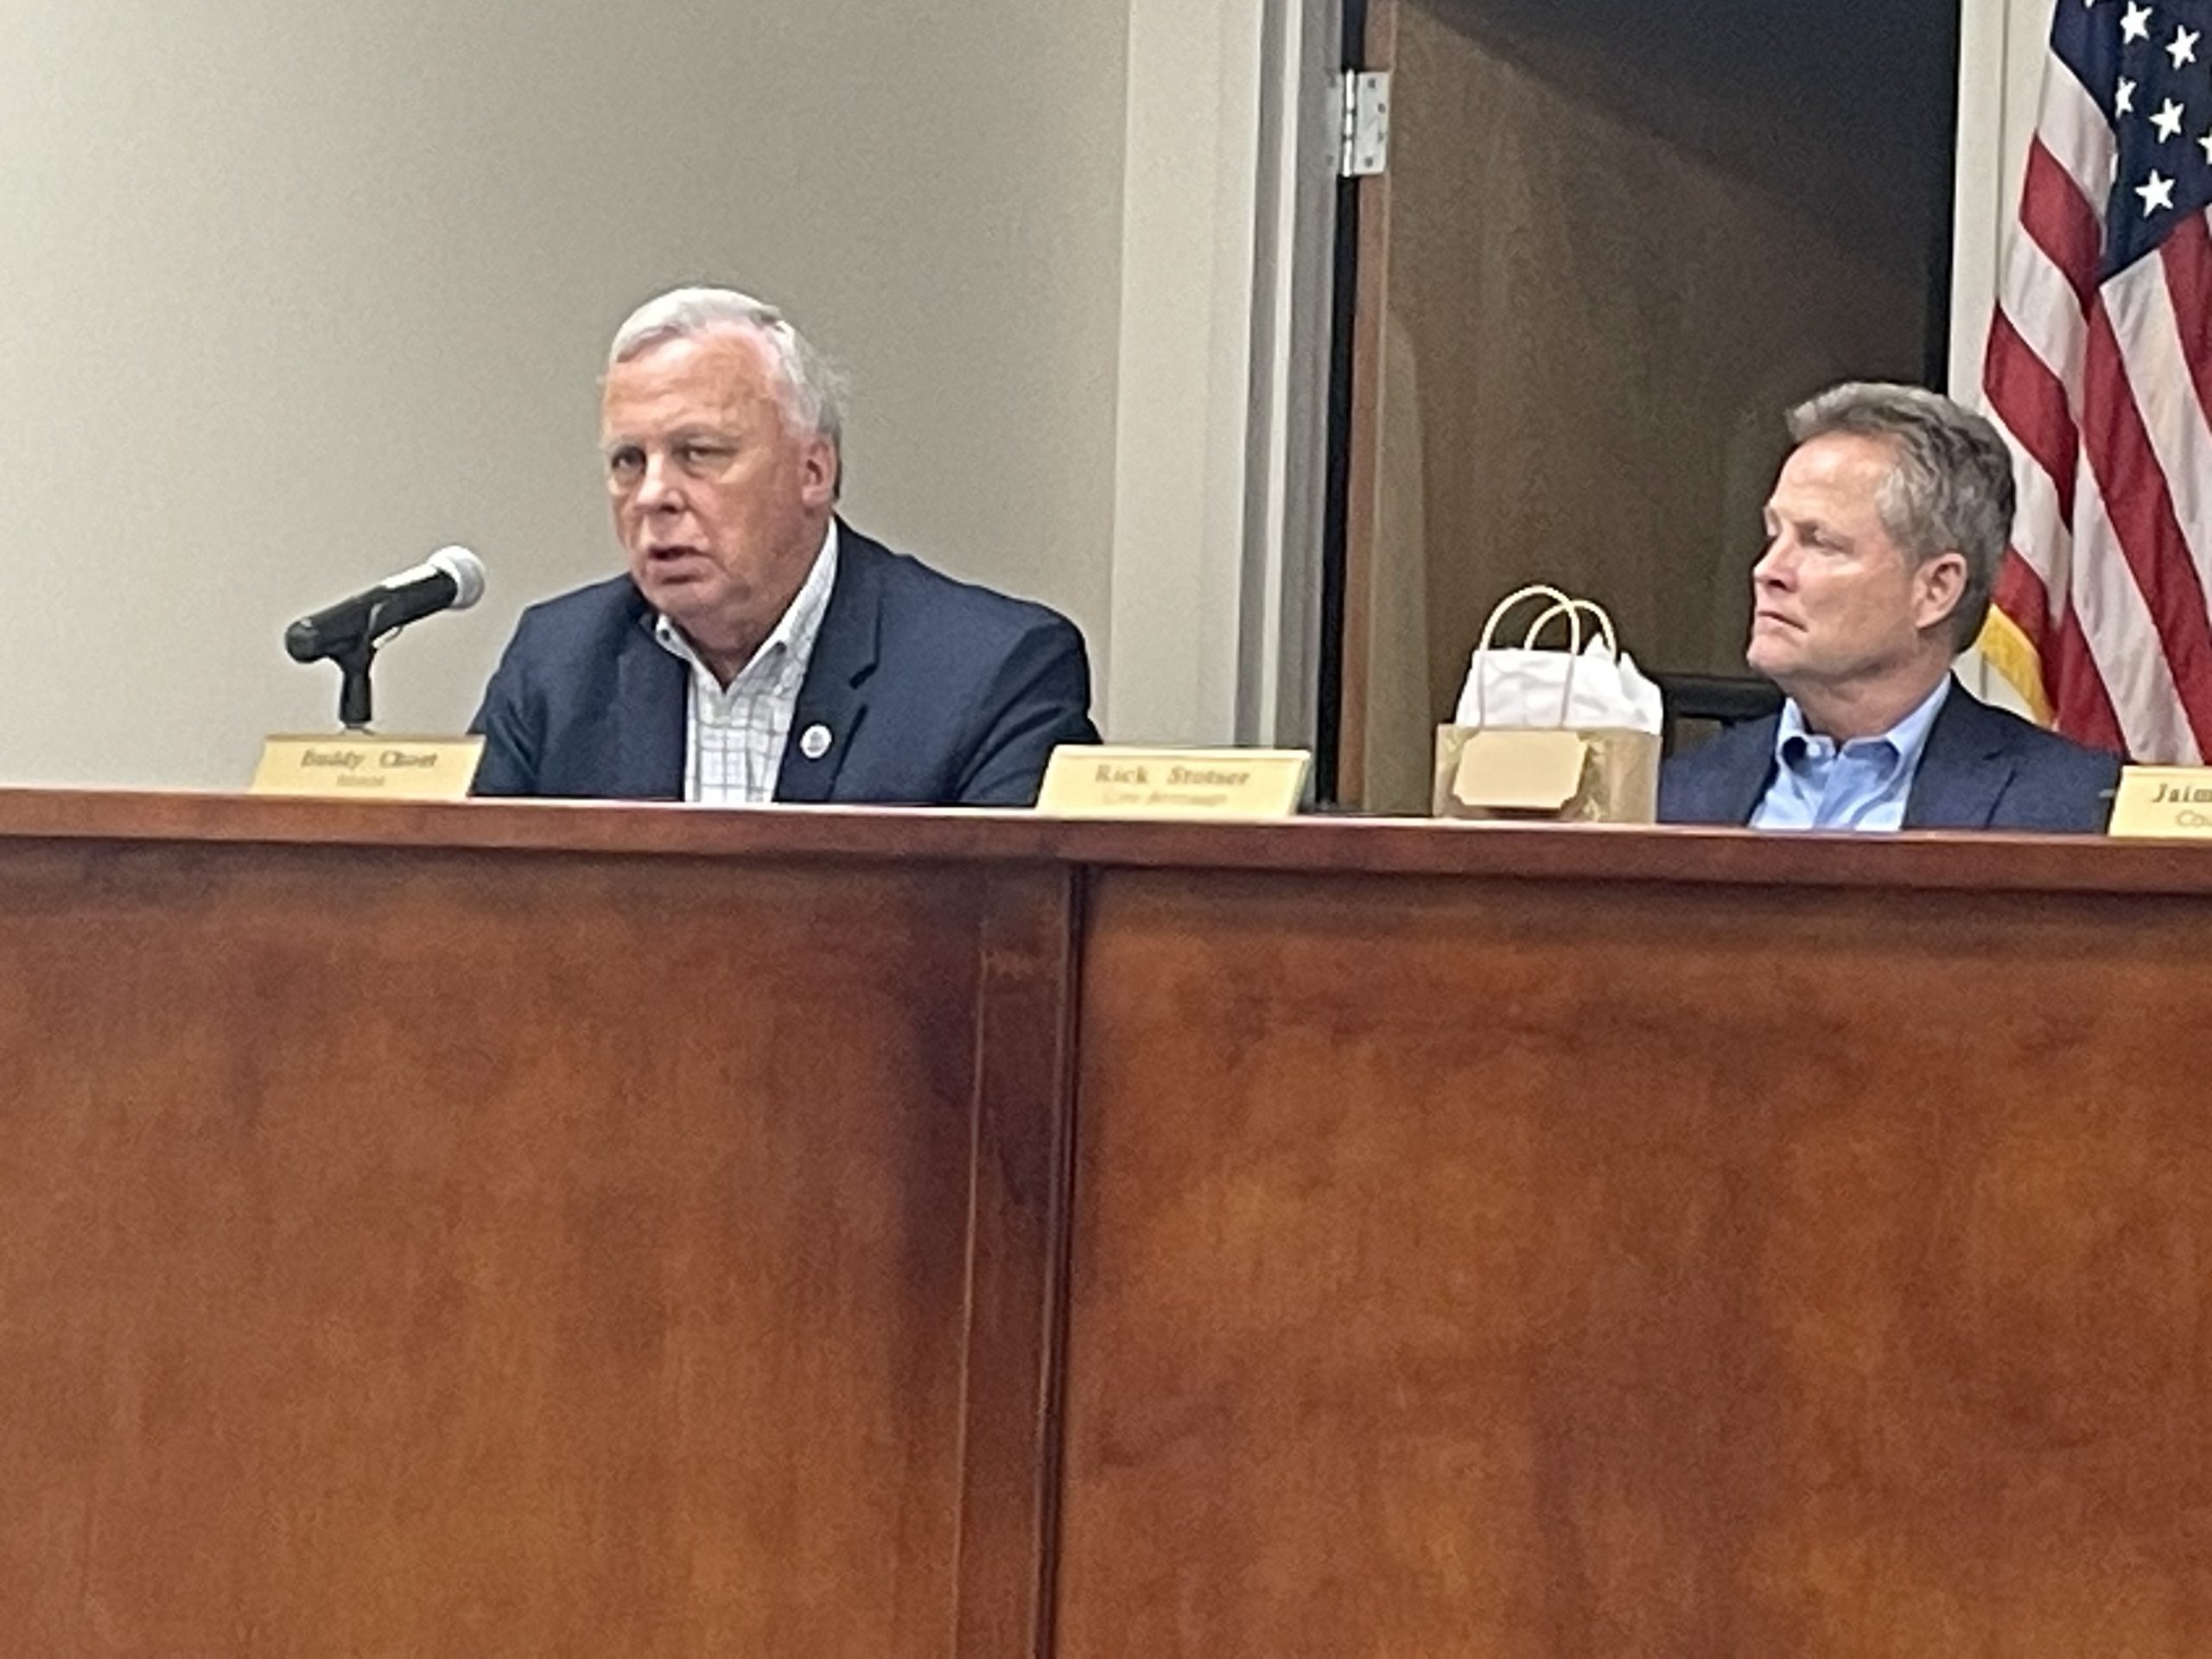 New state law paves way for Trussville to leave Jefferson County Personnel Board